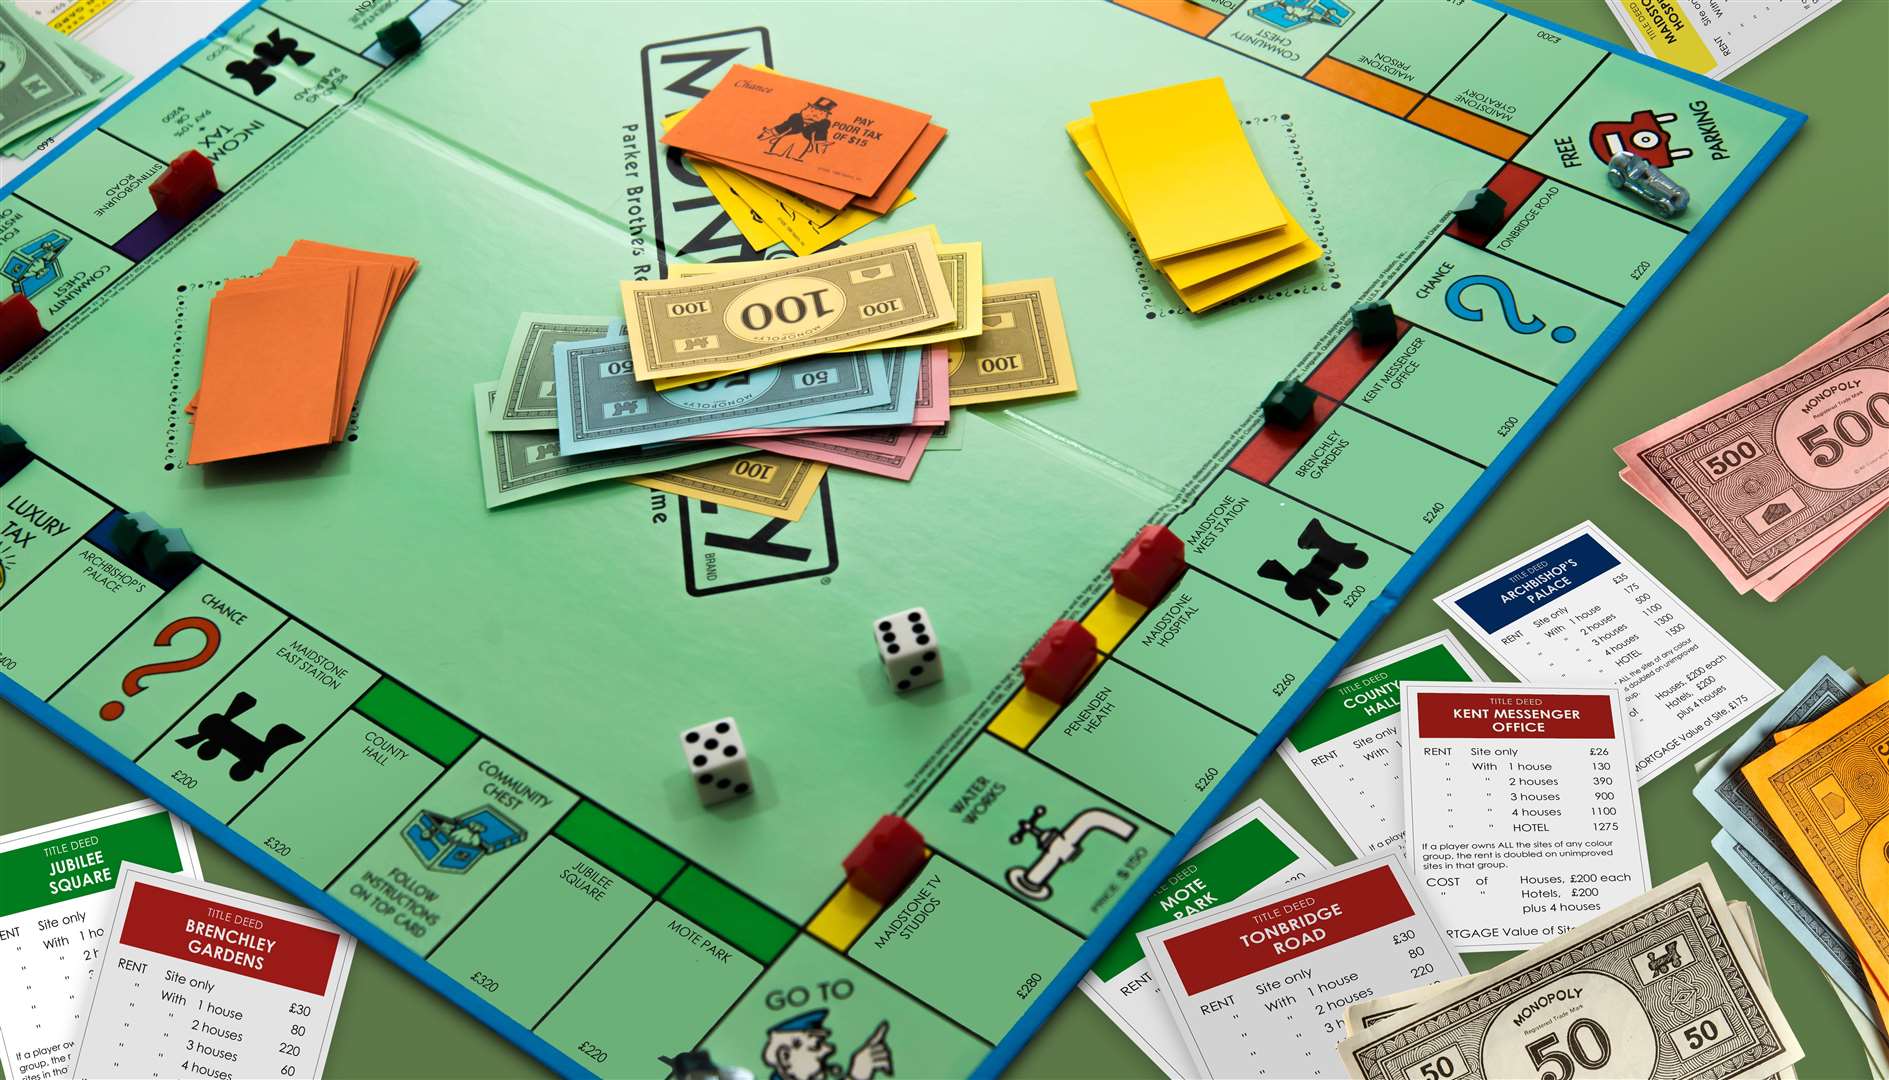 How the Maidstone edition of the iconic board game could look